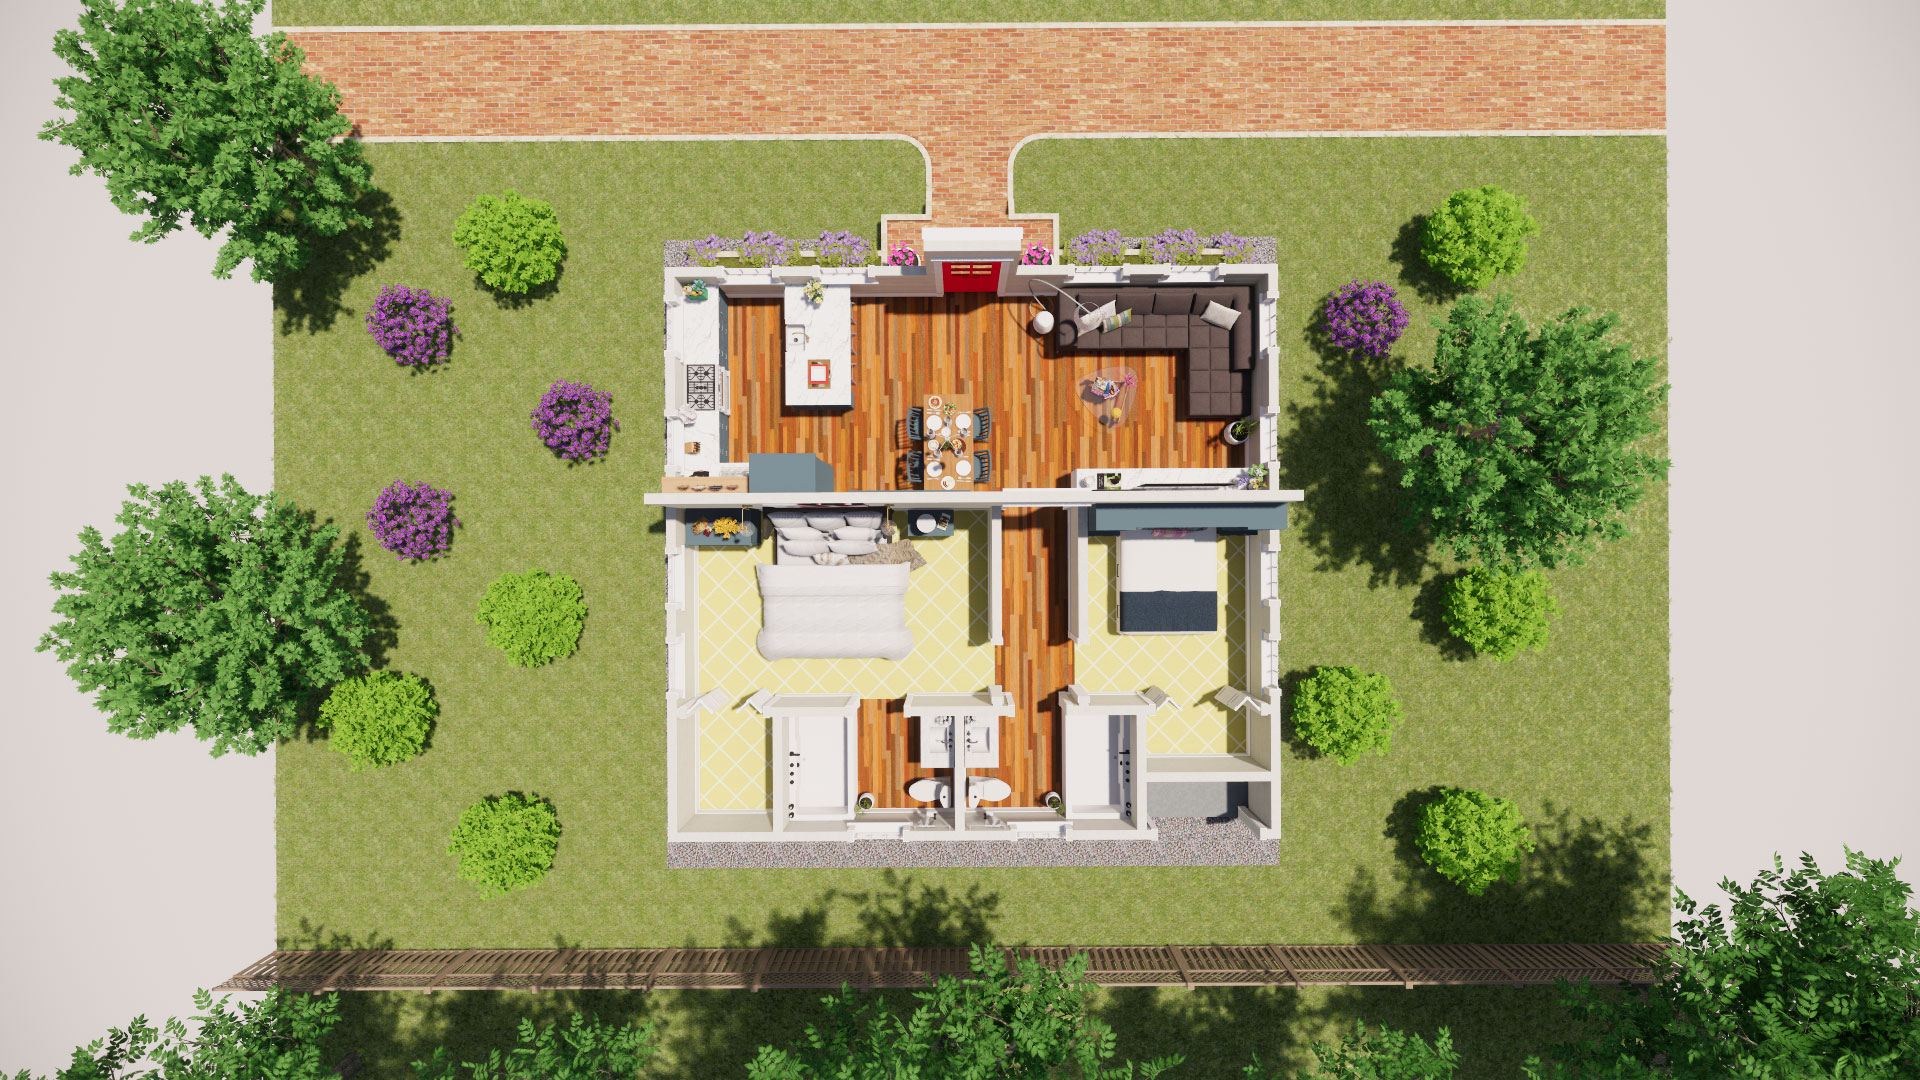 Floorplan of house, with kitchen and living area in front of building and two bedrooms and bathrooms in back.